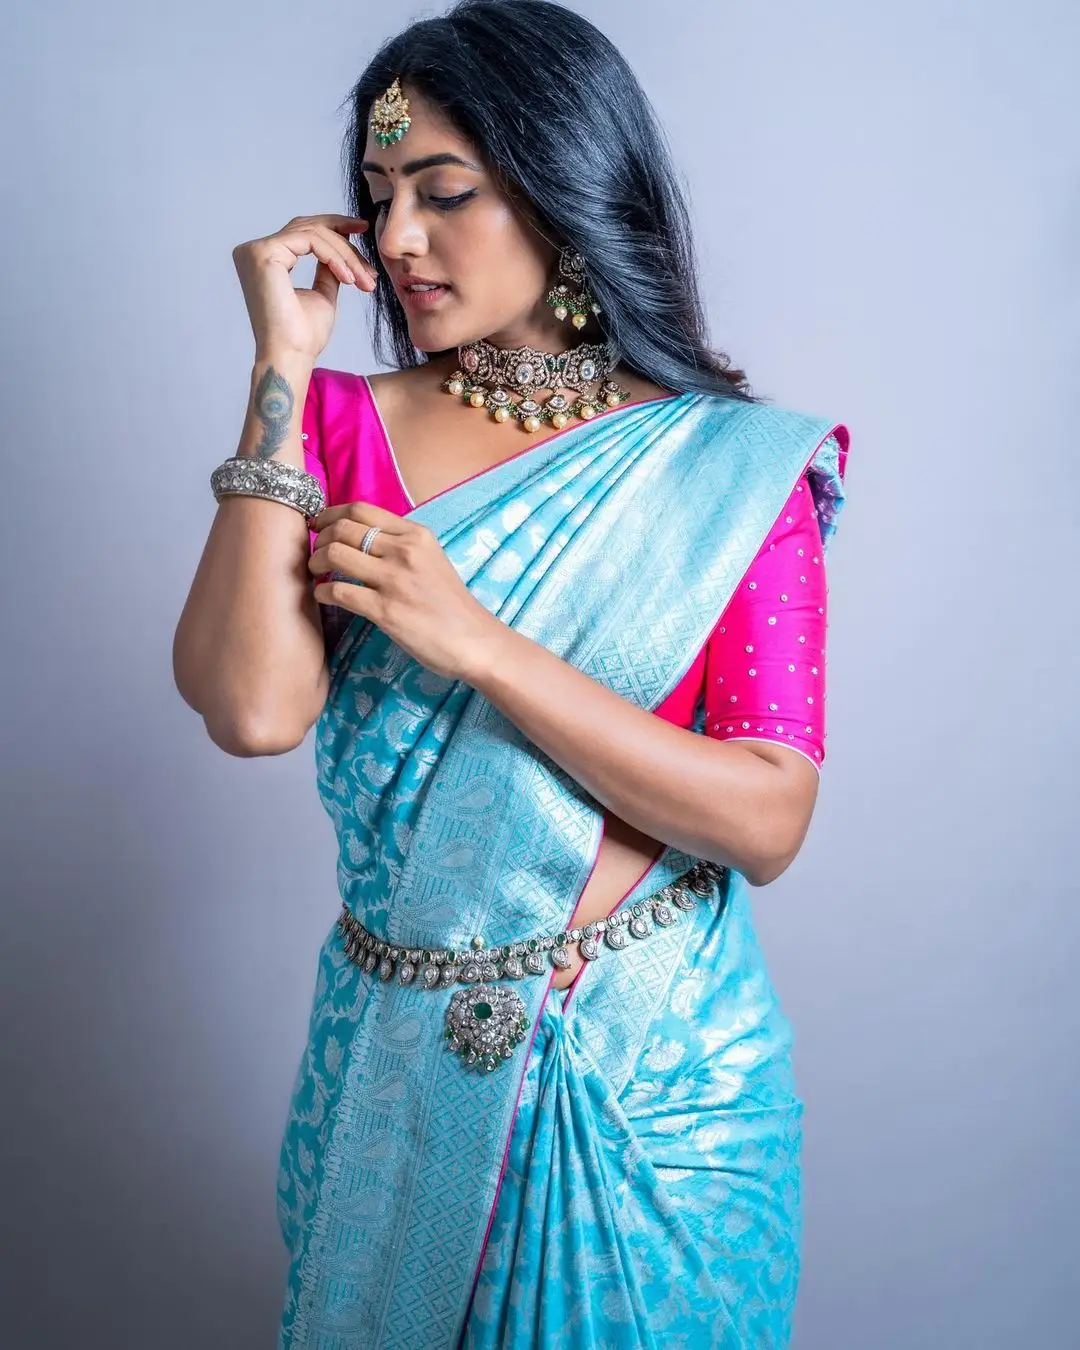 EESHA REBBA IN SOUTH INDIAN TRADITIONAL BLUE SAREE PINK BLOUSE 3